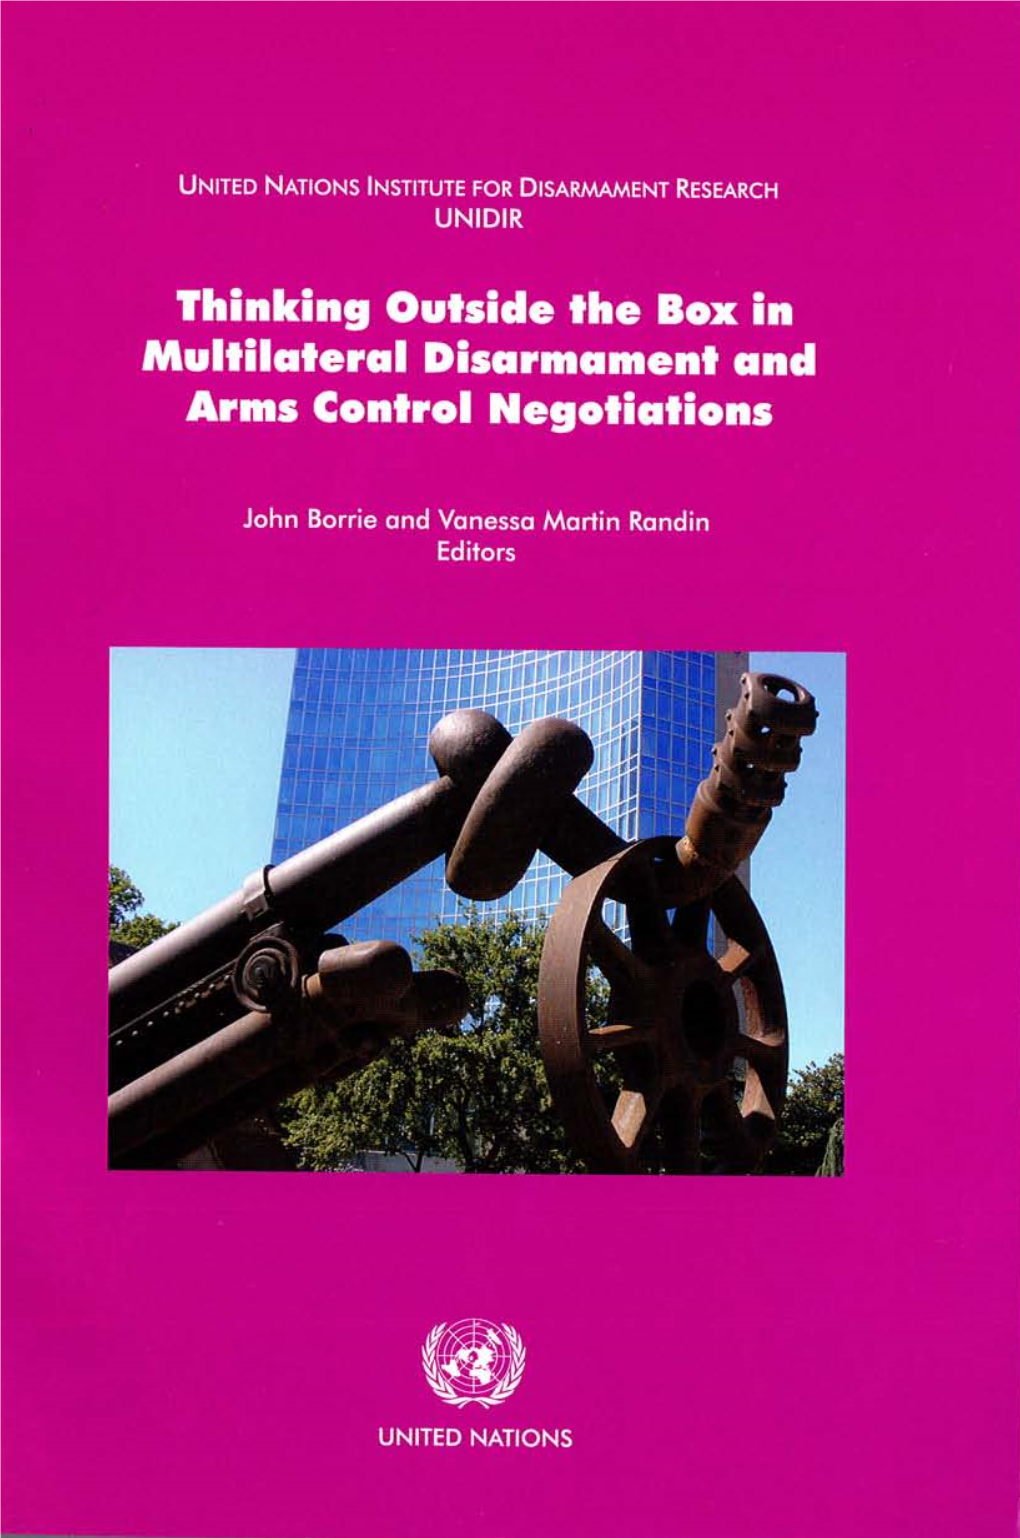 Thinking Outside the Box in Multilateral Disarmament and Arms Control Negotiations